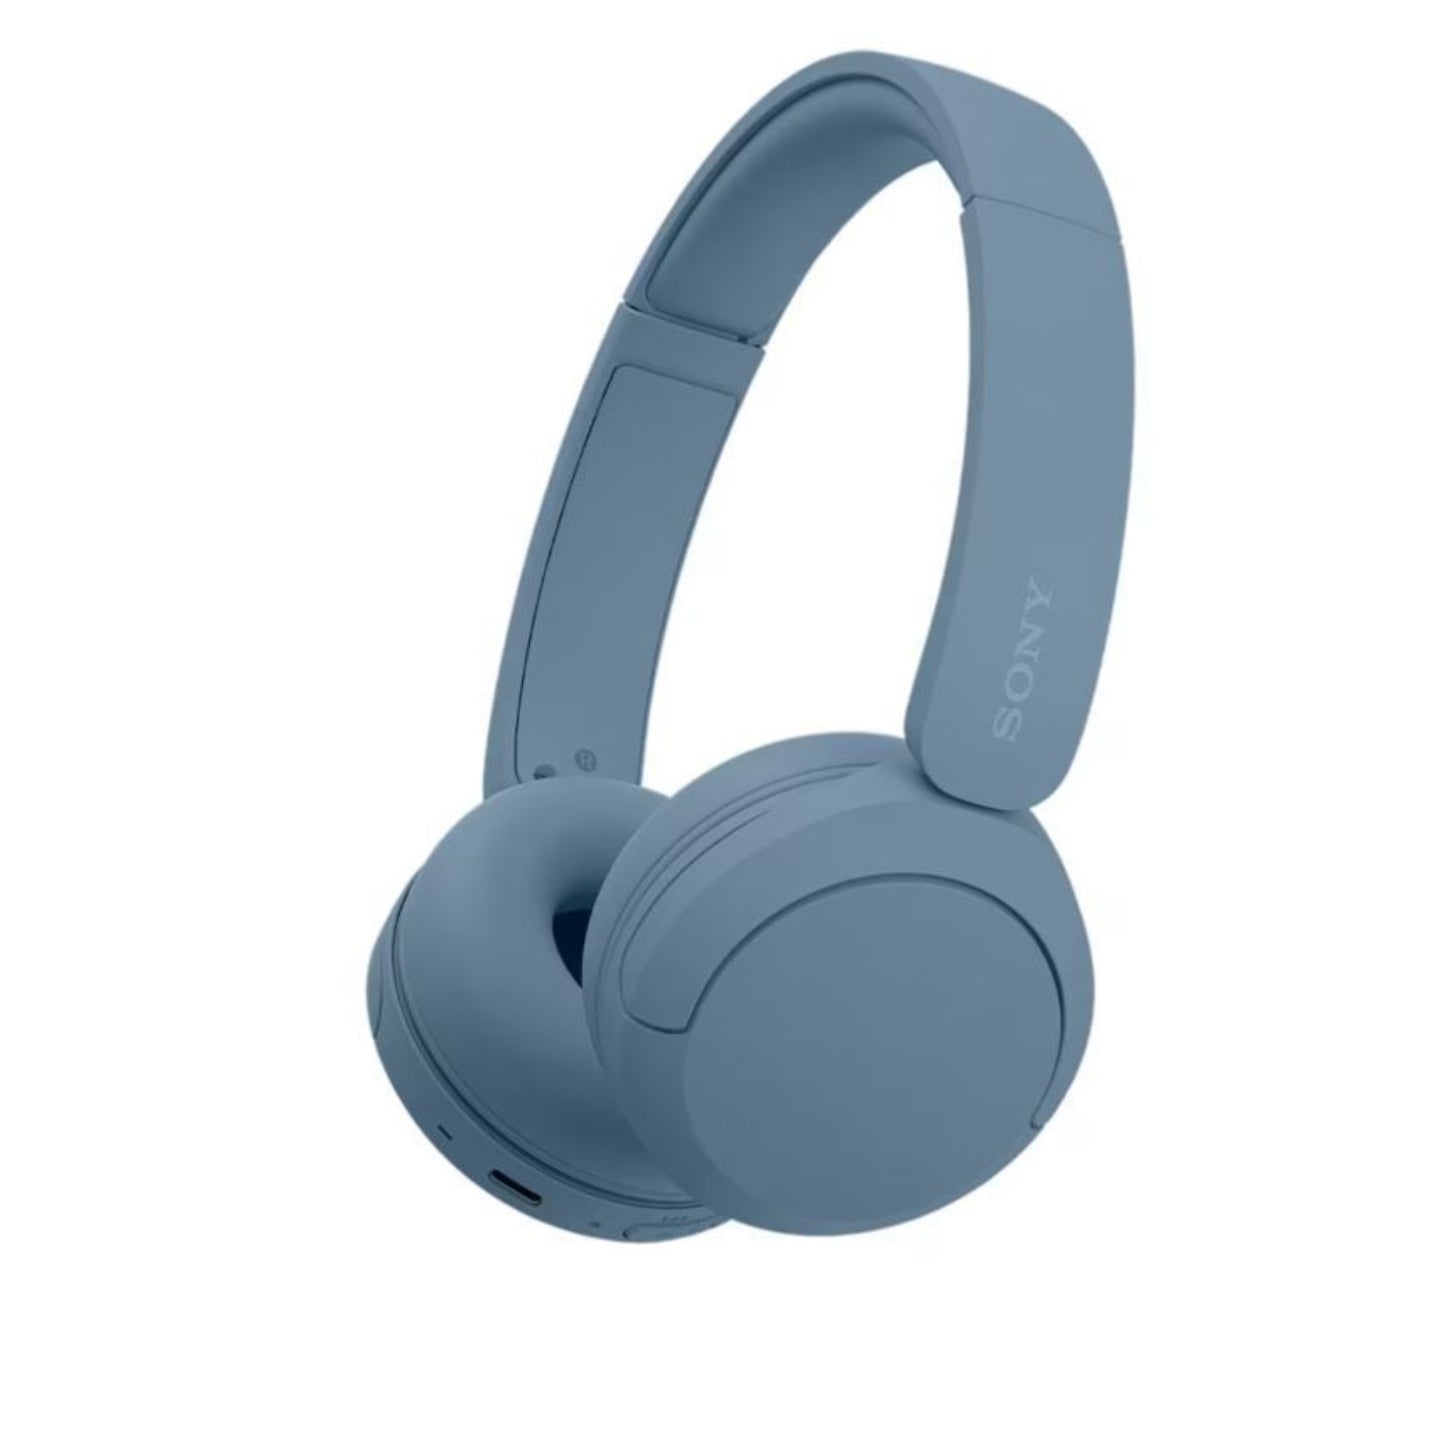 Audifonos Bluetooth On ear Sony WH-CH520 50Hrs